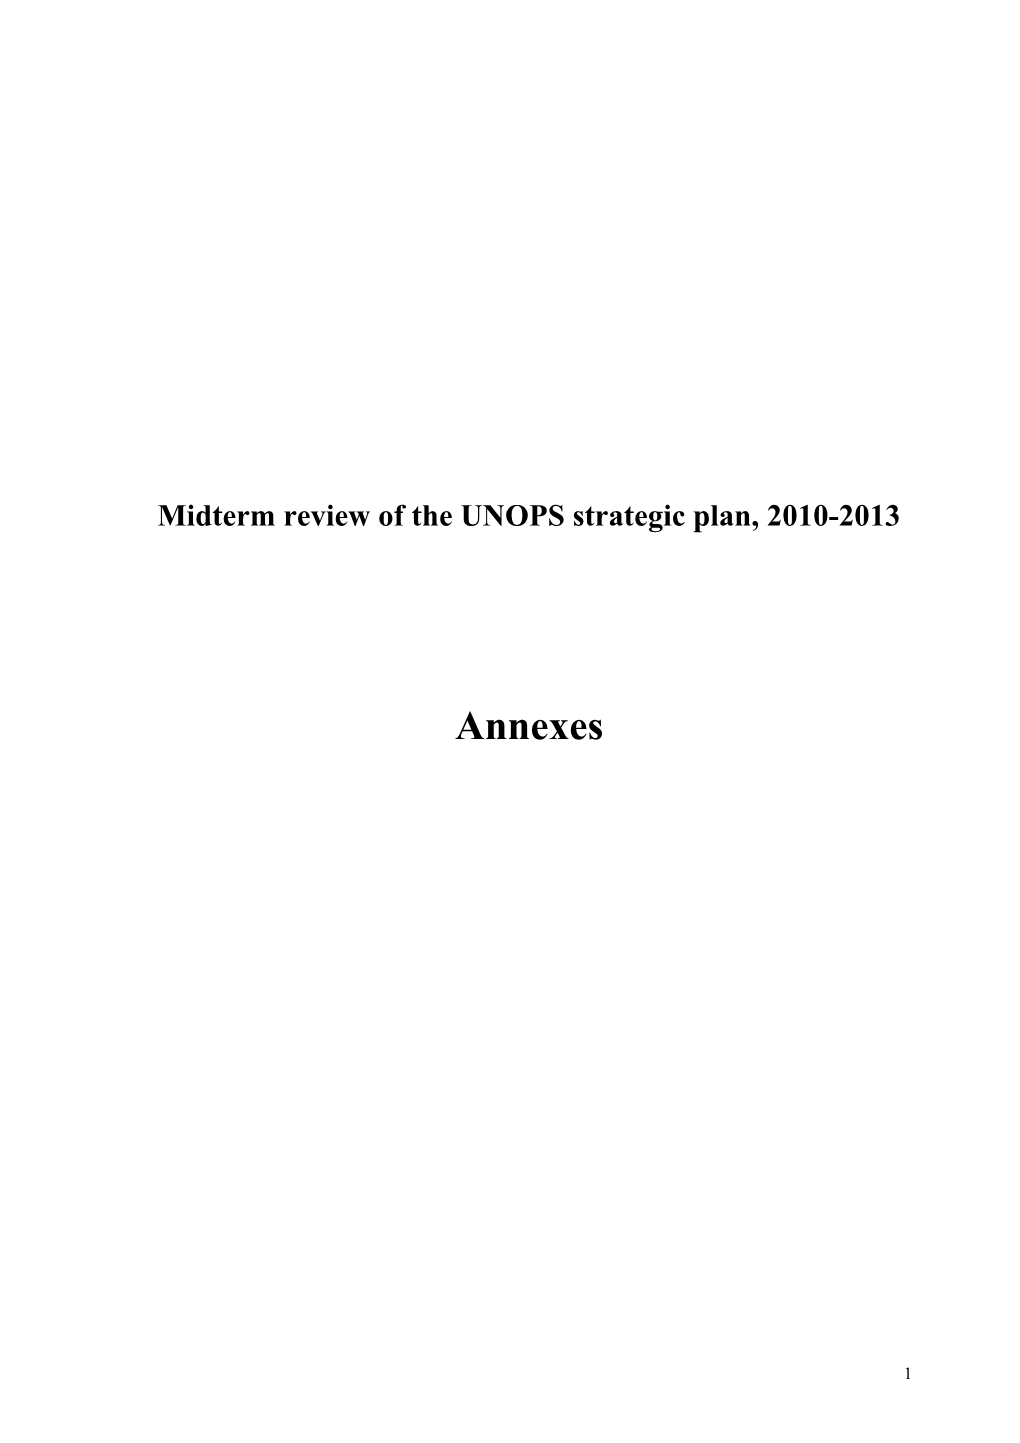 Midterm Review of the UNOPS Strategic Plan, 2010-2013